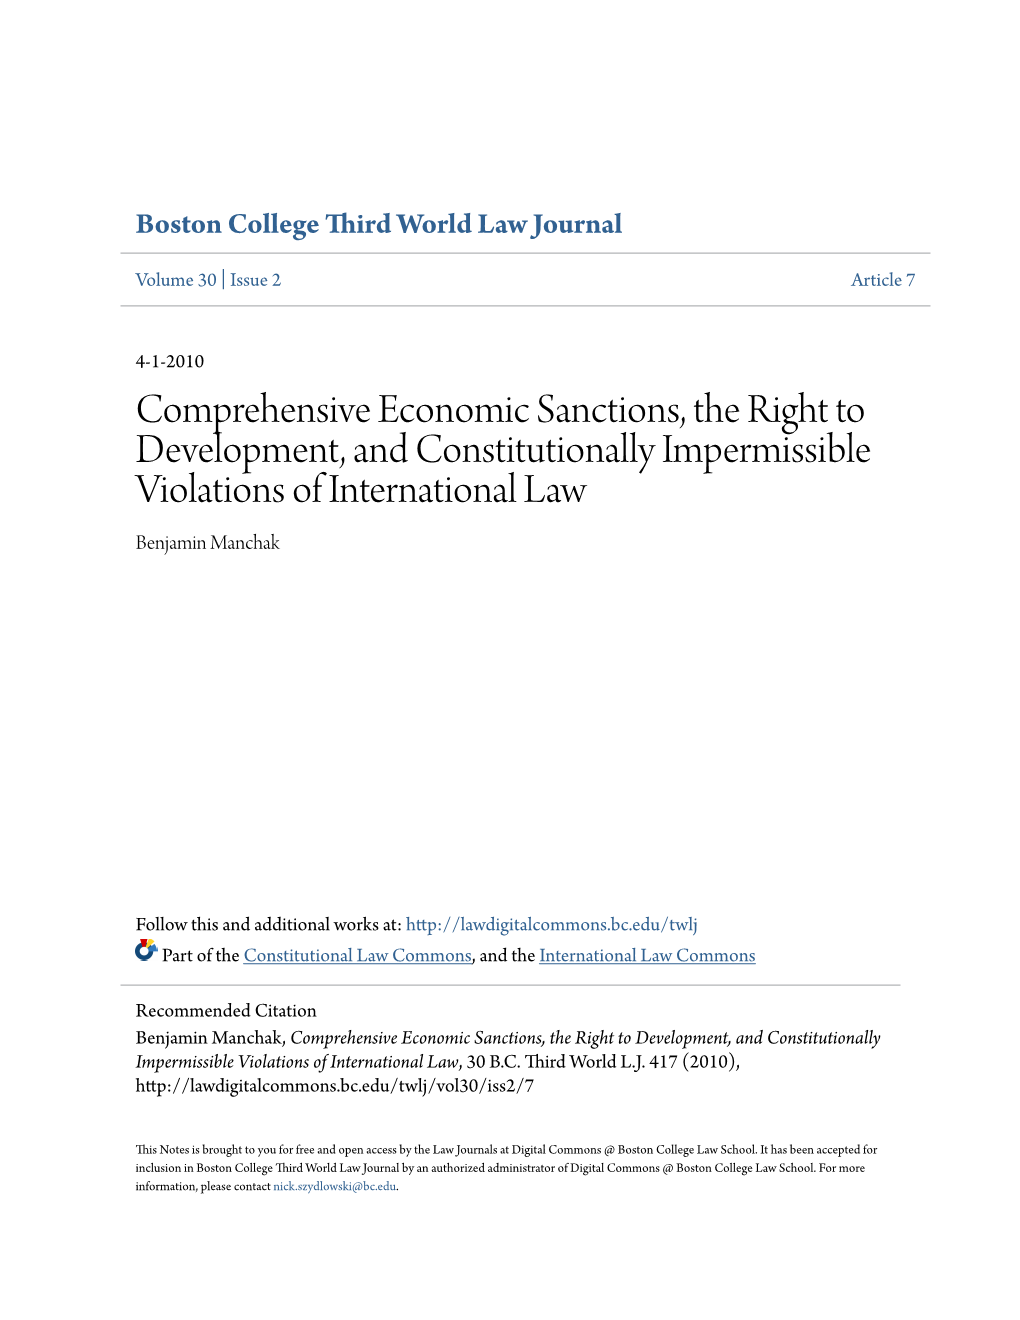 Comprehensive Economic Sanctions, the Right to Development, and Constitutionally Impermissible Violations of International Law Benjamin Manchak